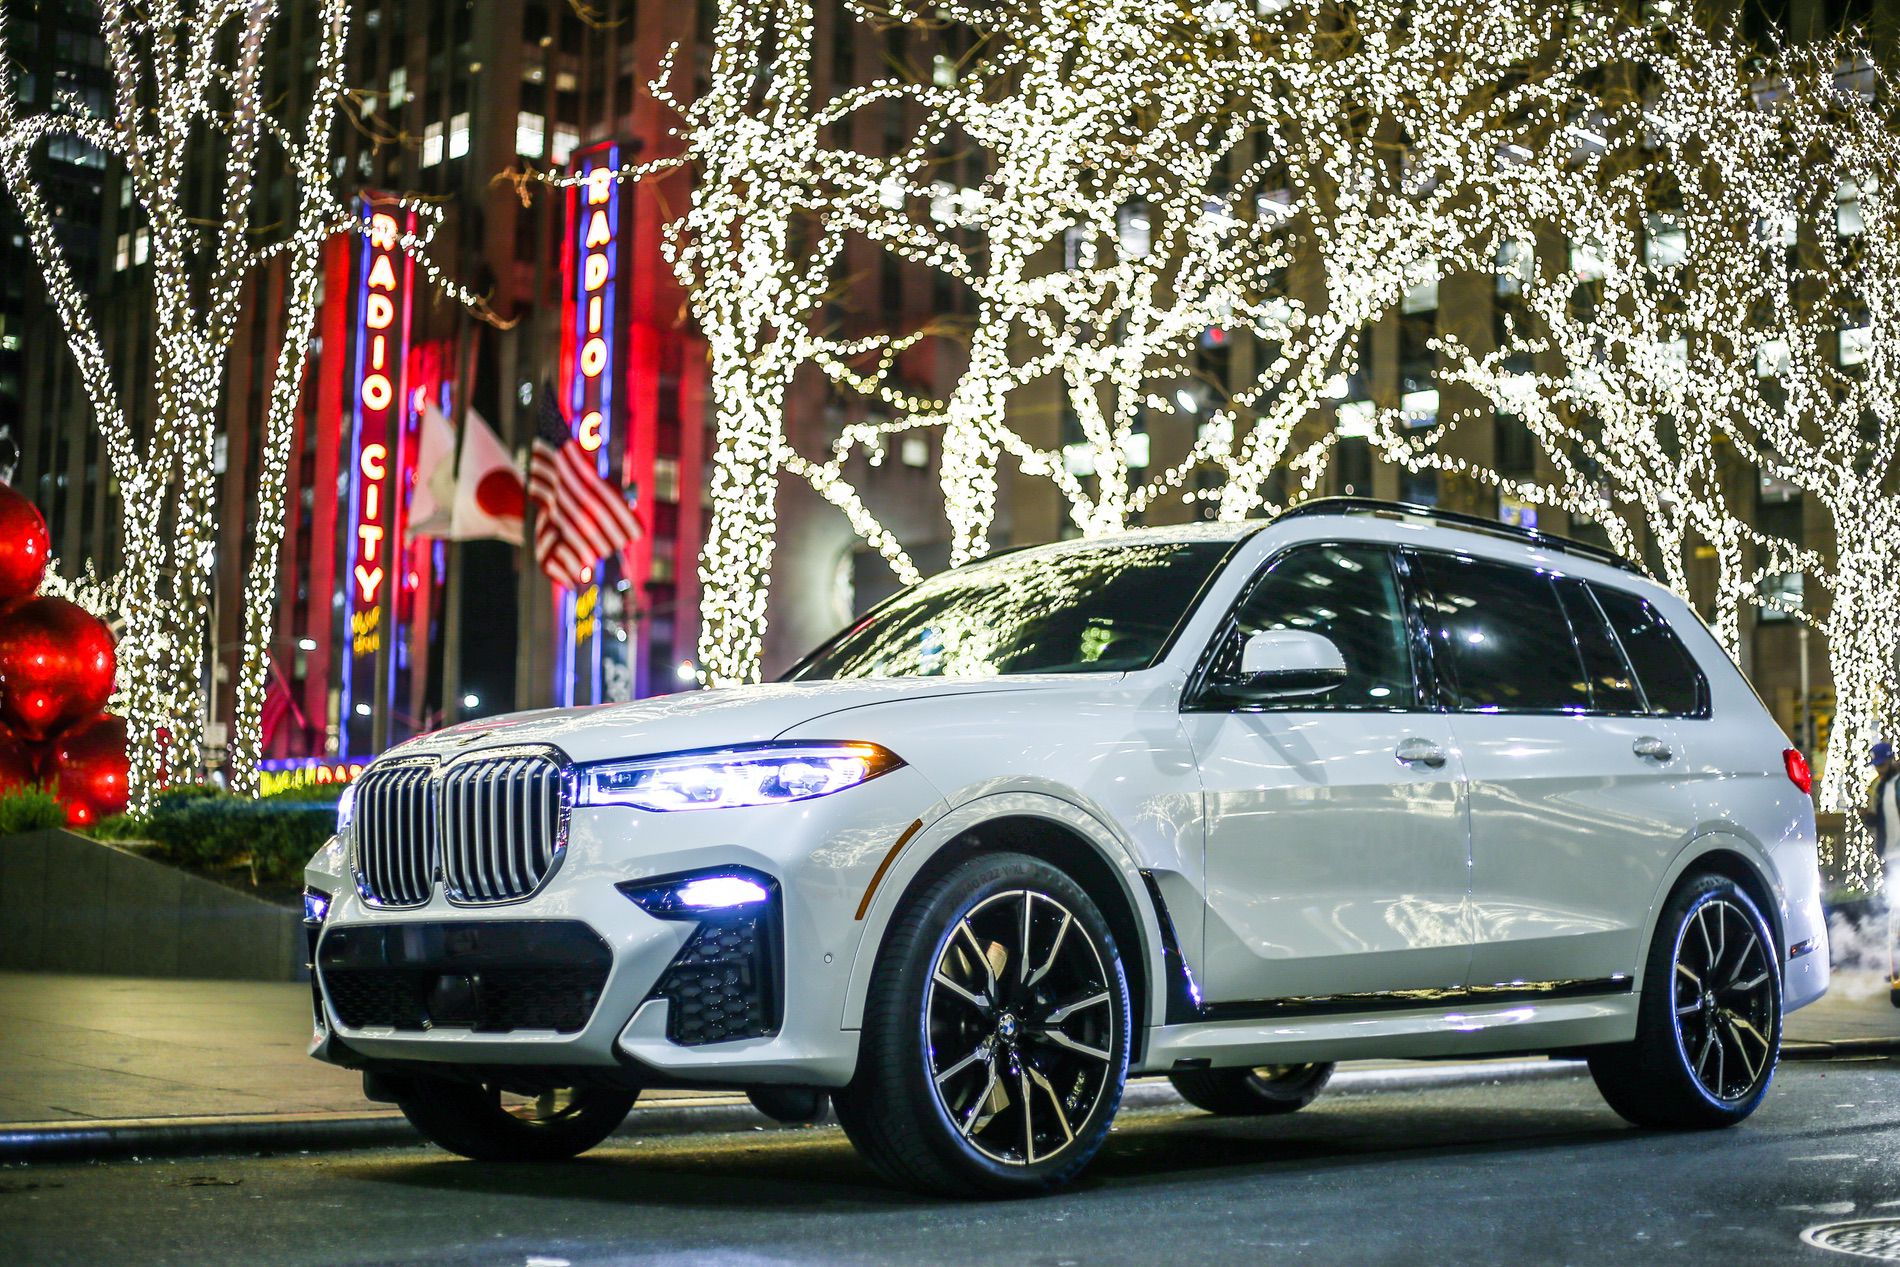 Video: 10 Things You Need to Know about the BMW X7